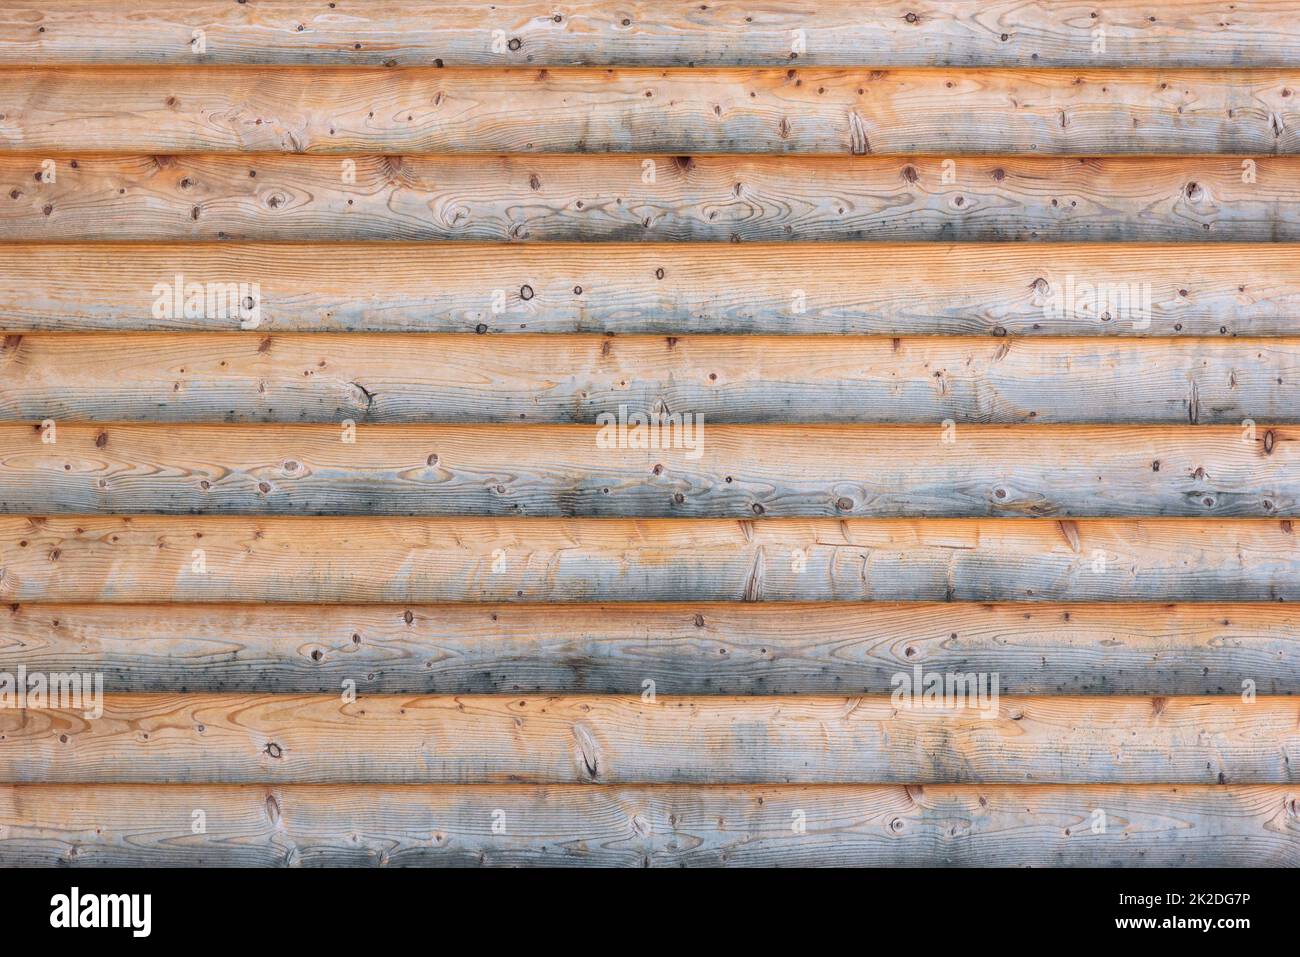 Weathered wooden background made of plain planks Stock Photo